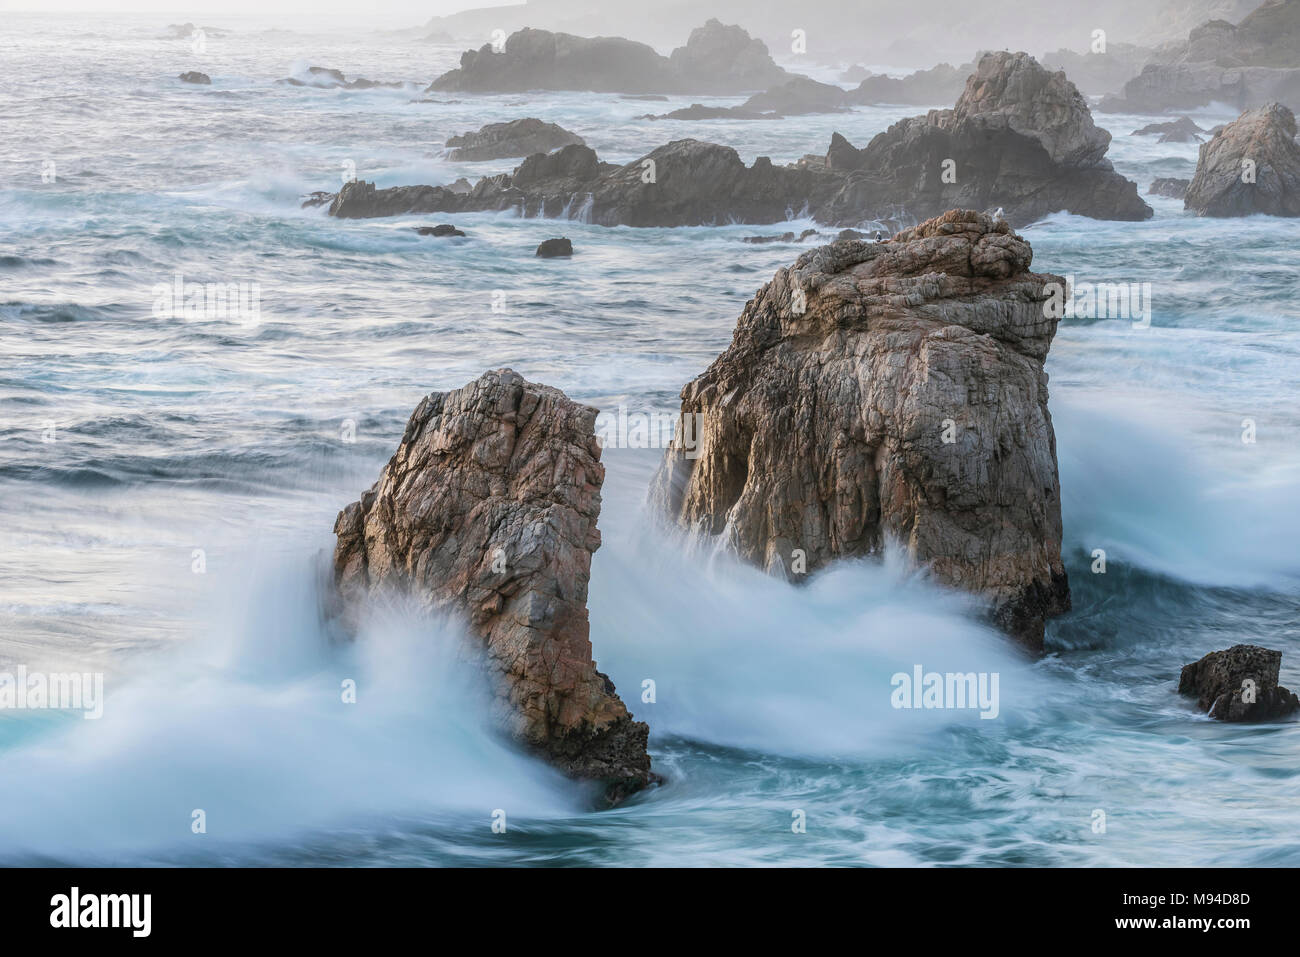 Surf and crashing waves, Garrapata State Park, CA, USA, by Dominique Braud/Dembinsky Photo Assoc Stock Photo